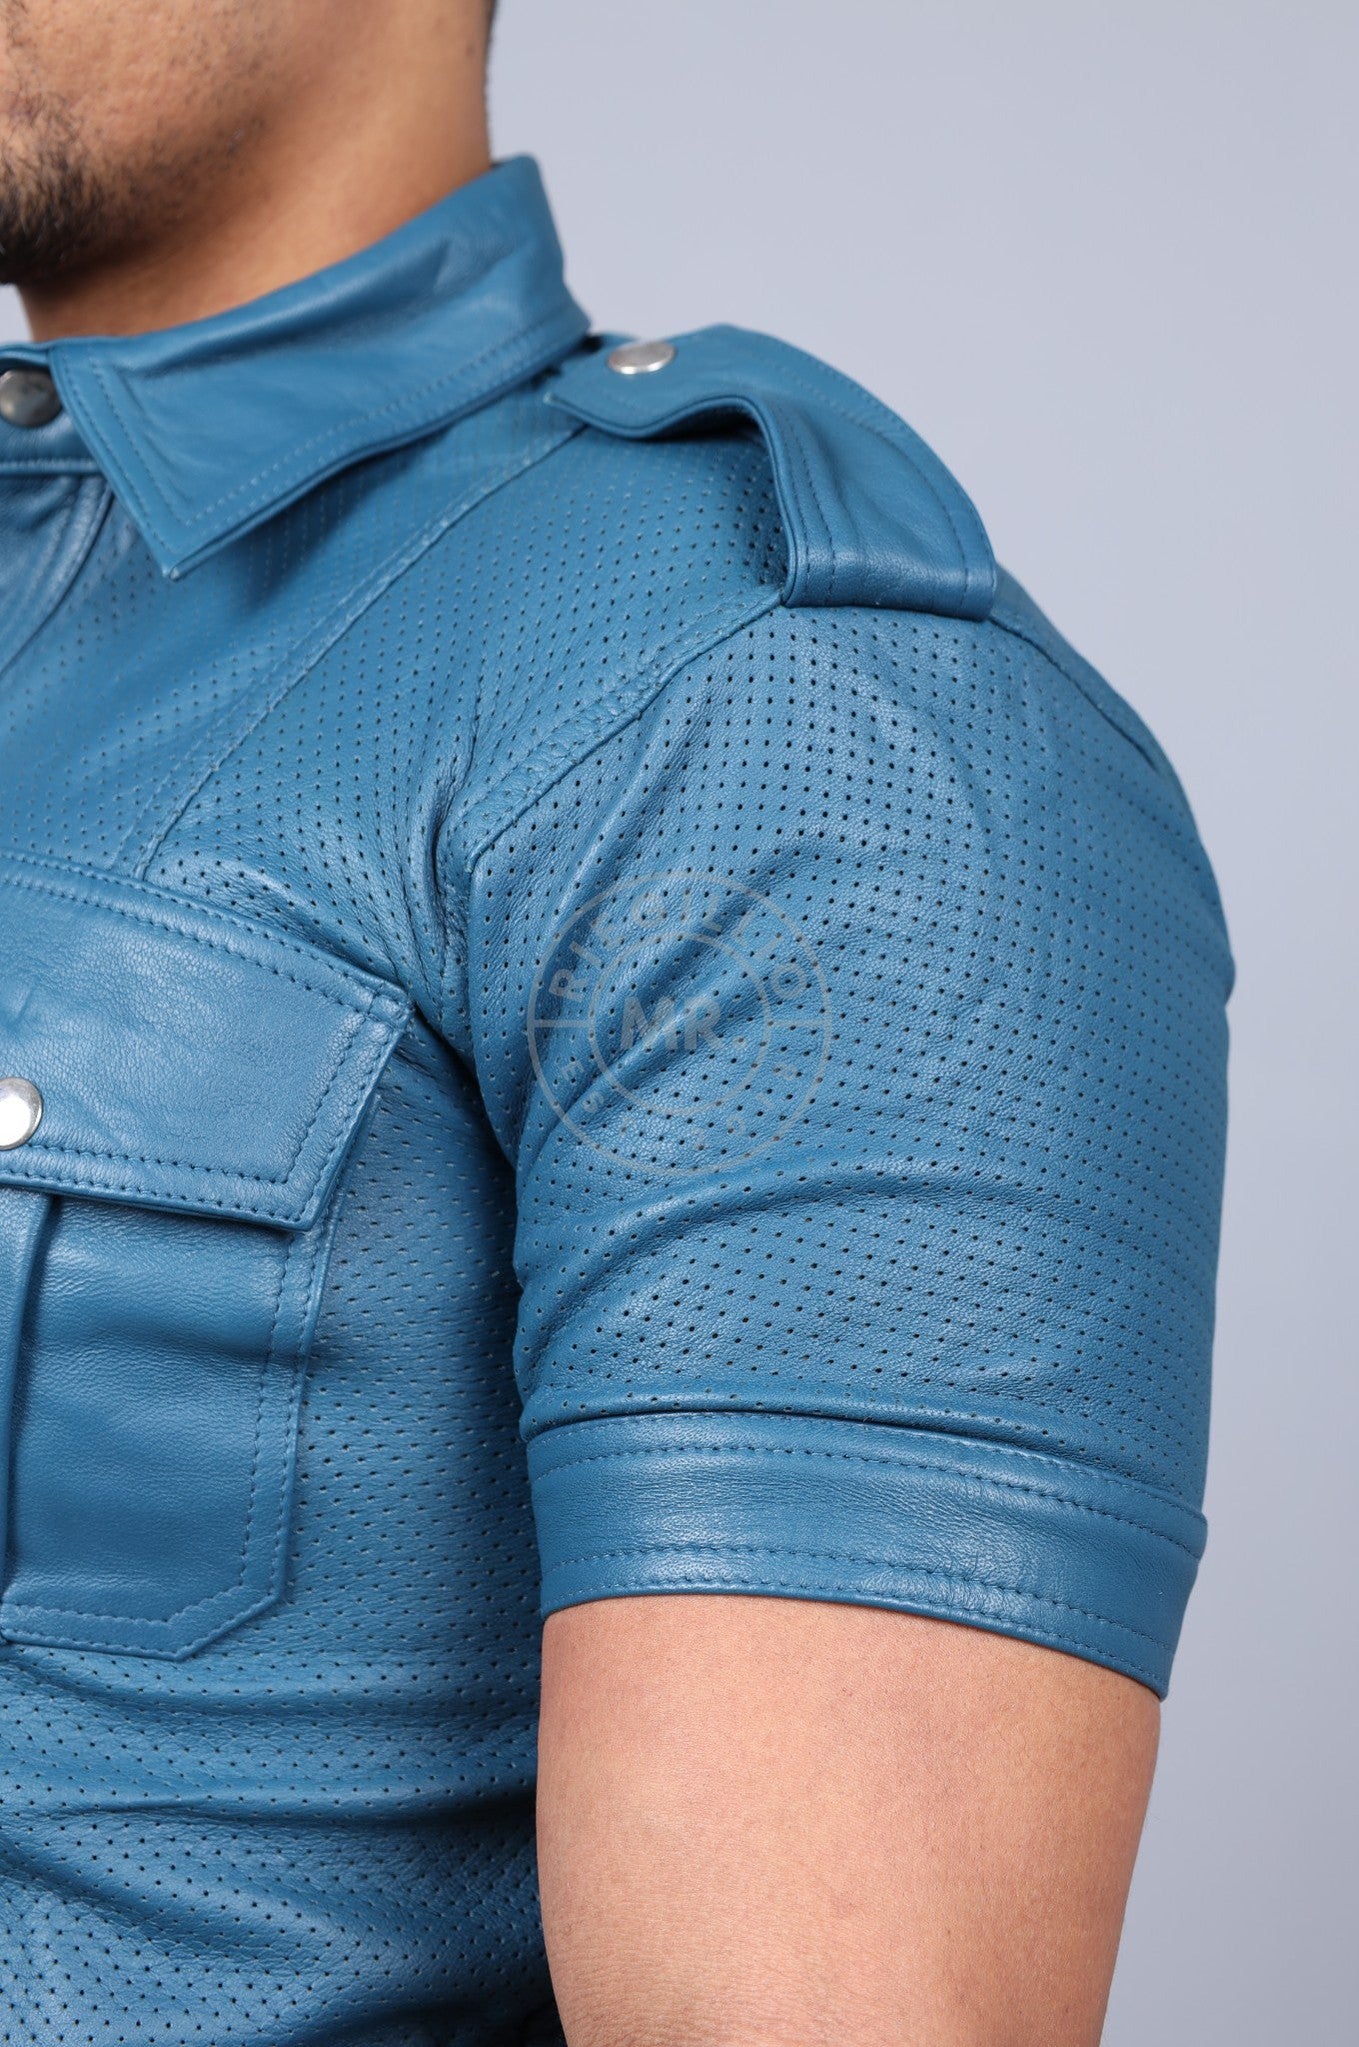 Jeans Blue Leather Perforated Shirt